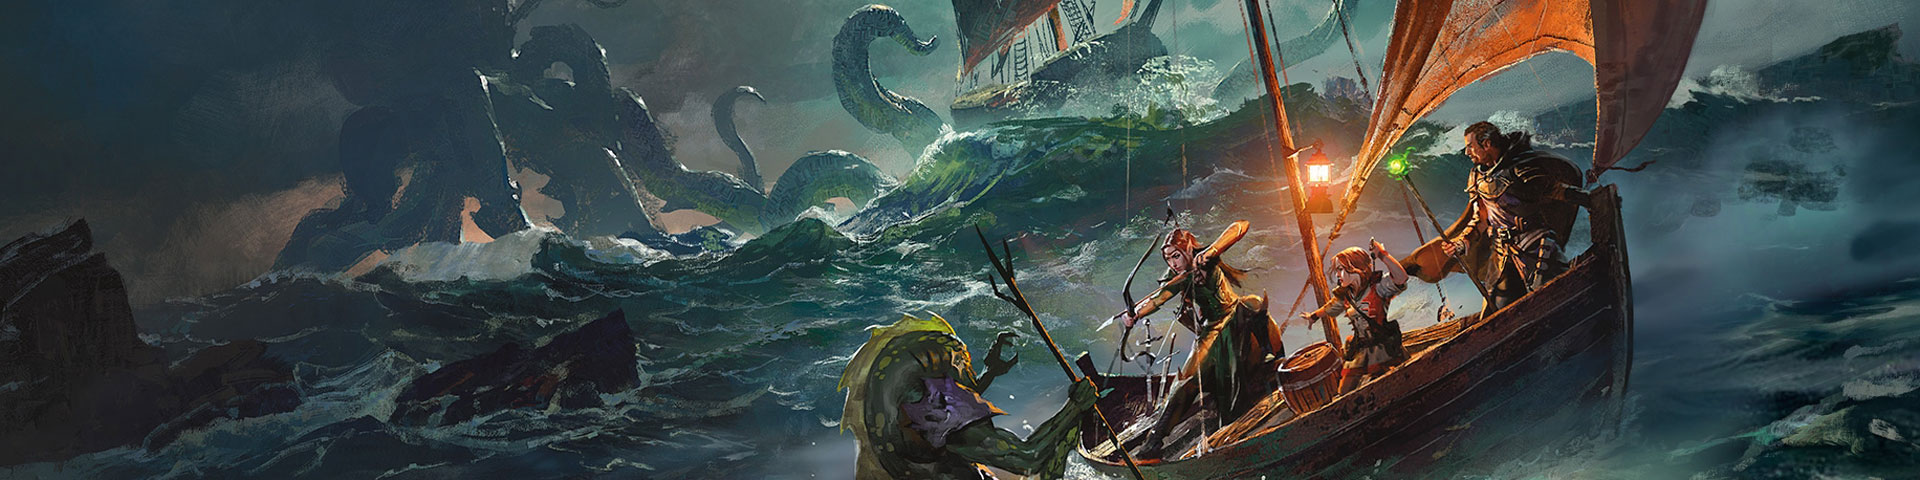 Adventurers battle an aquatic humanoid while a giant octopus attacks a sailing ship in the background.